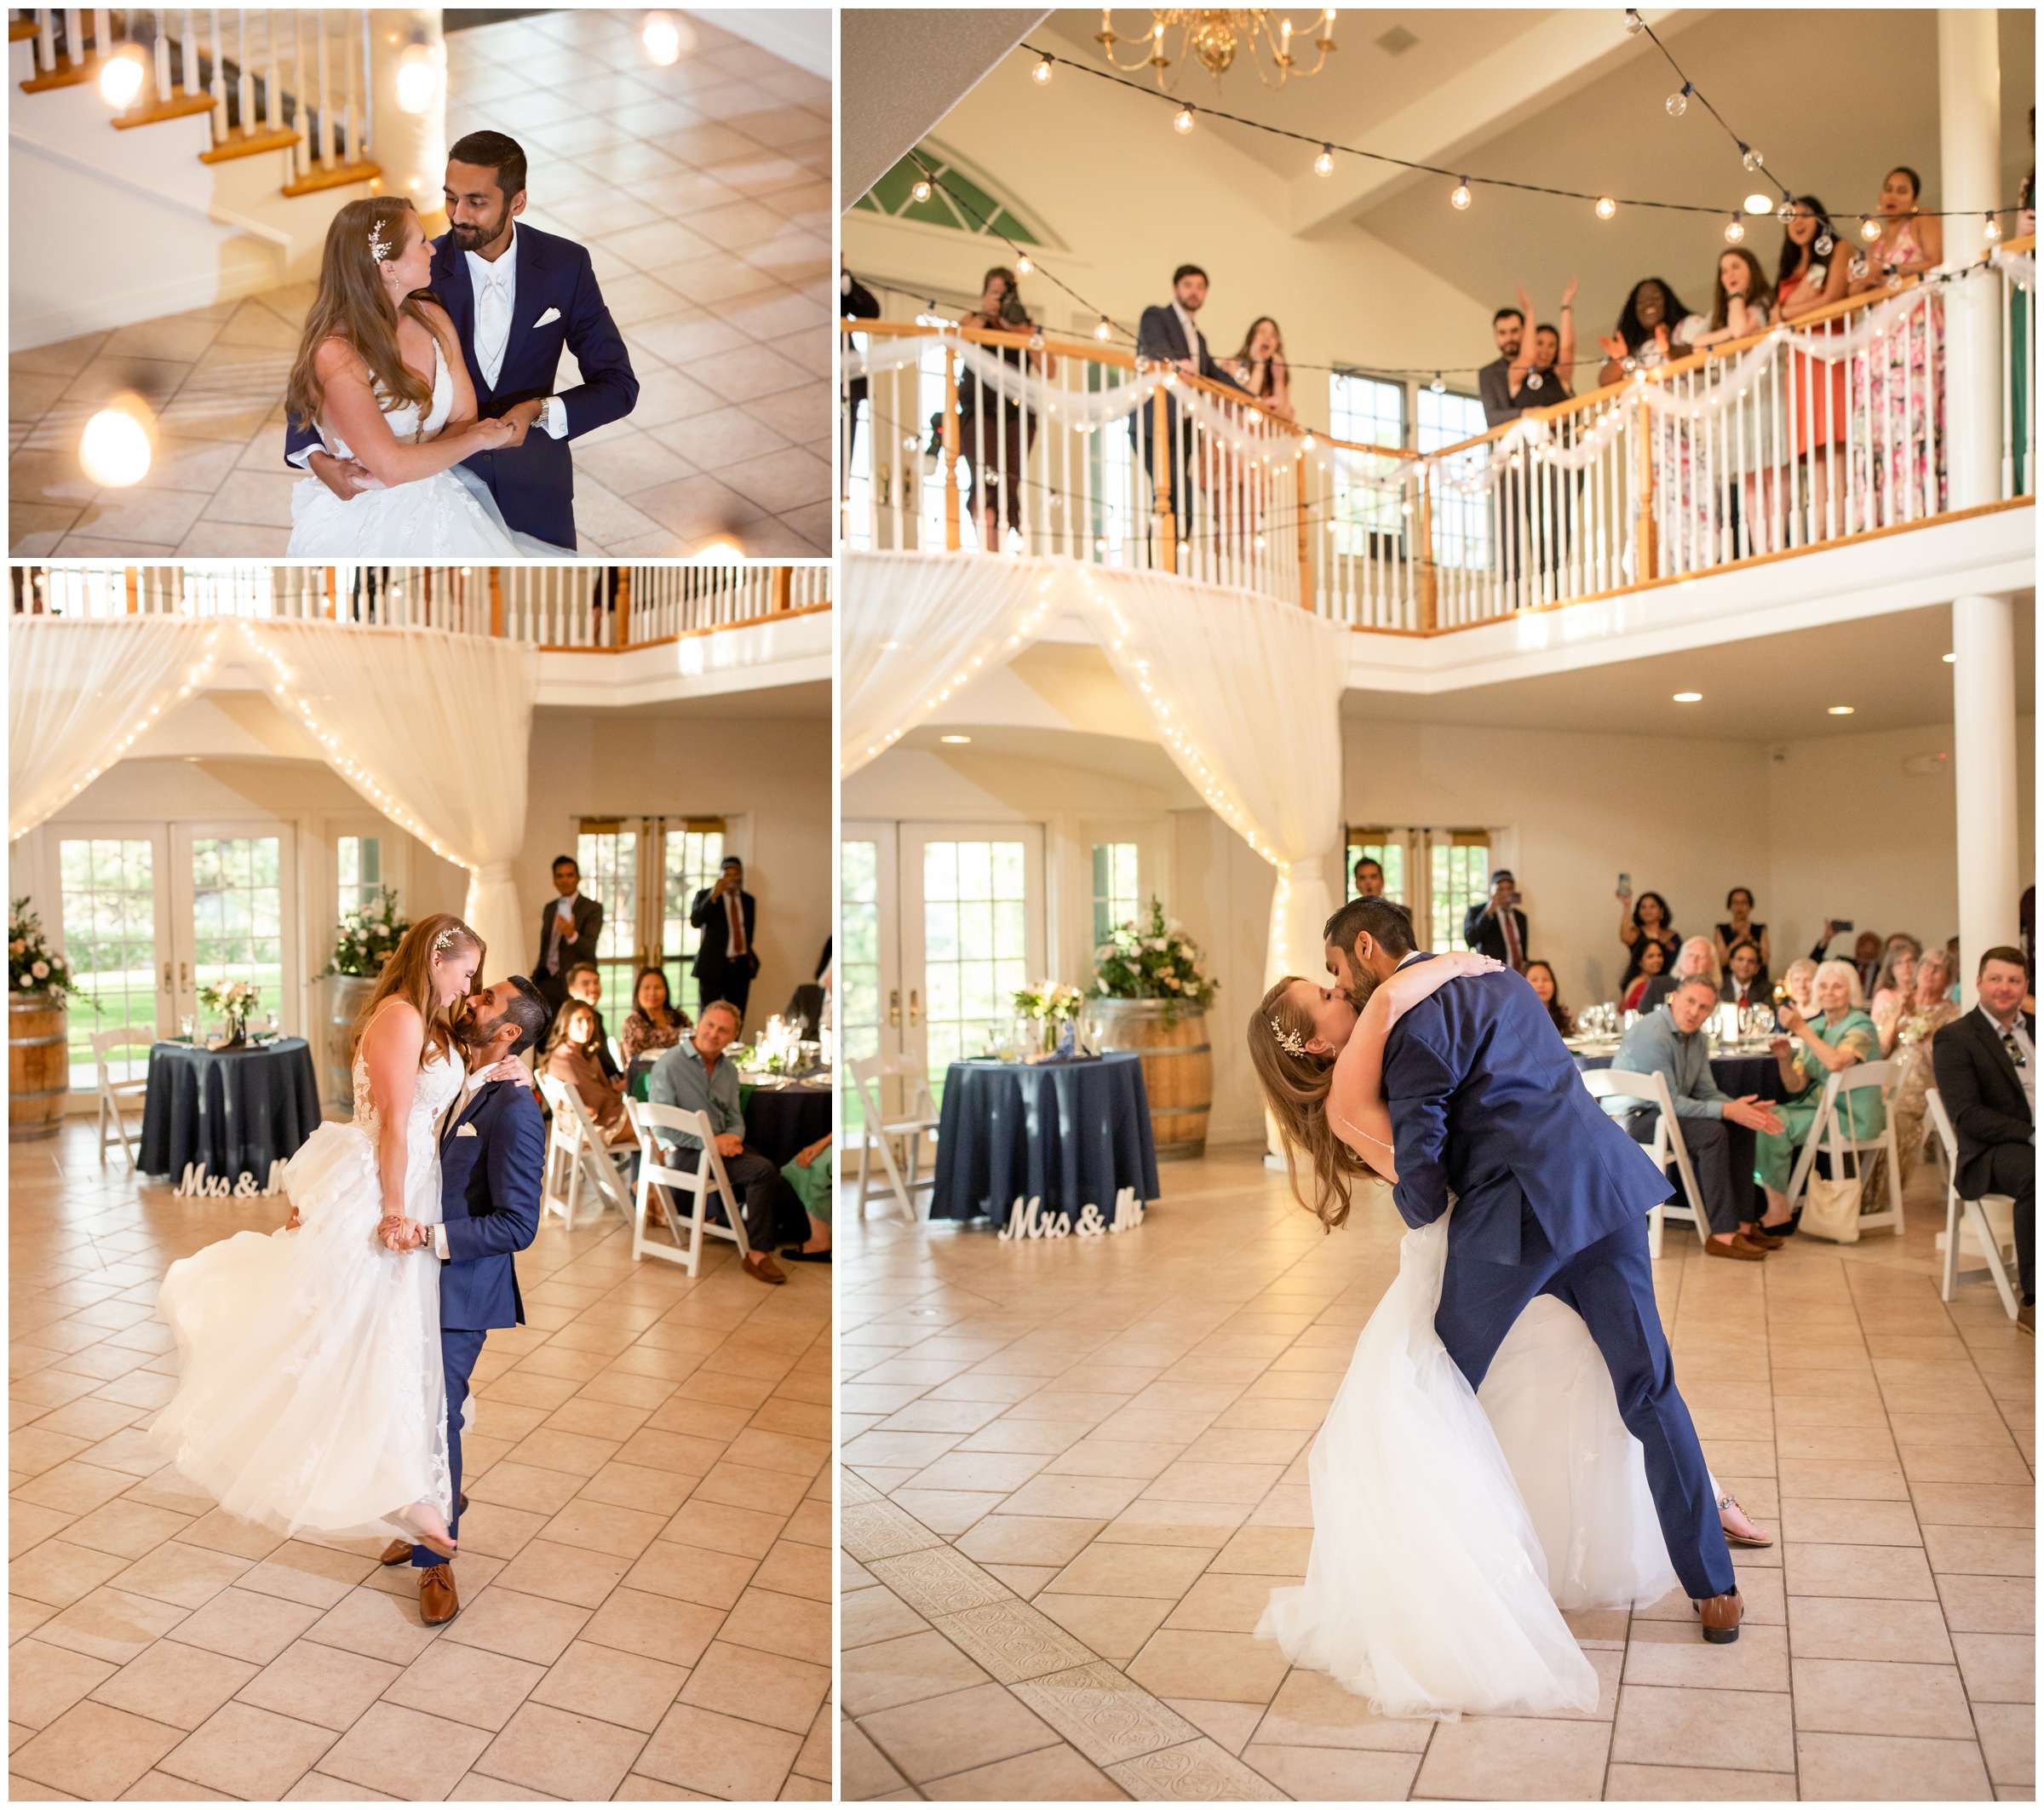 groom lifting and dipping bride during first dance at Lionscrest Manor Colorado wedding reception 